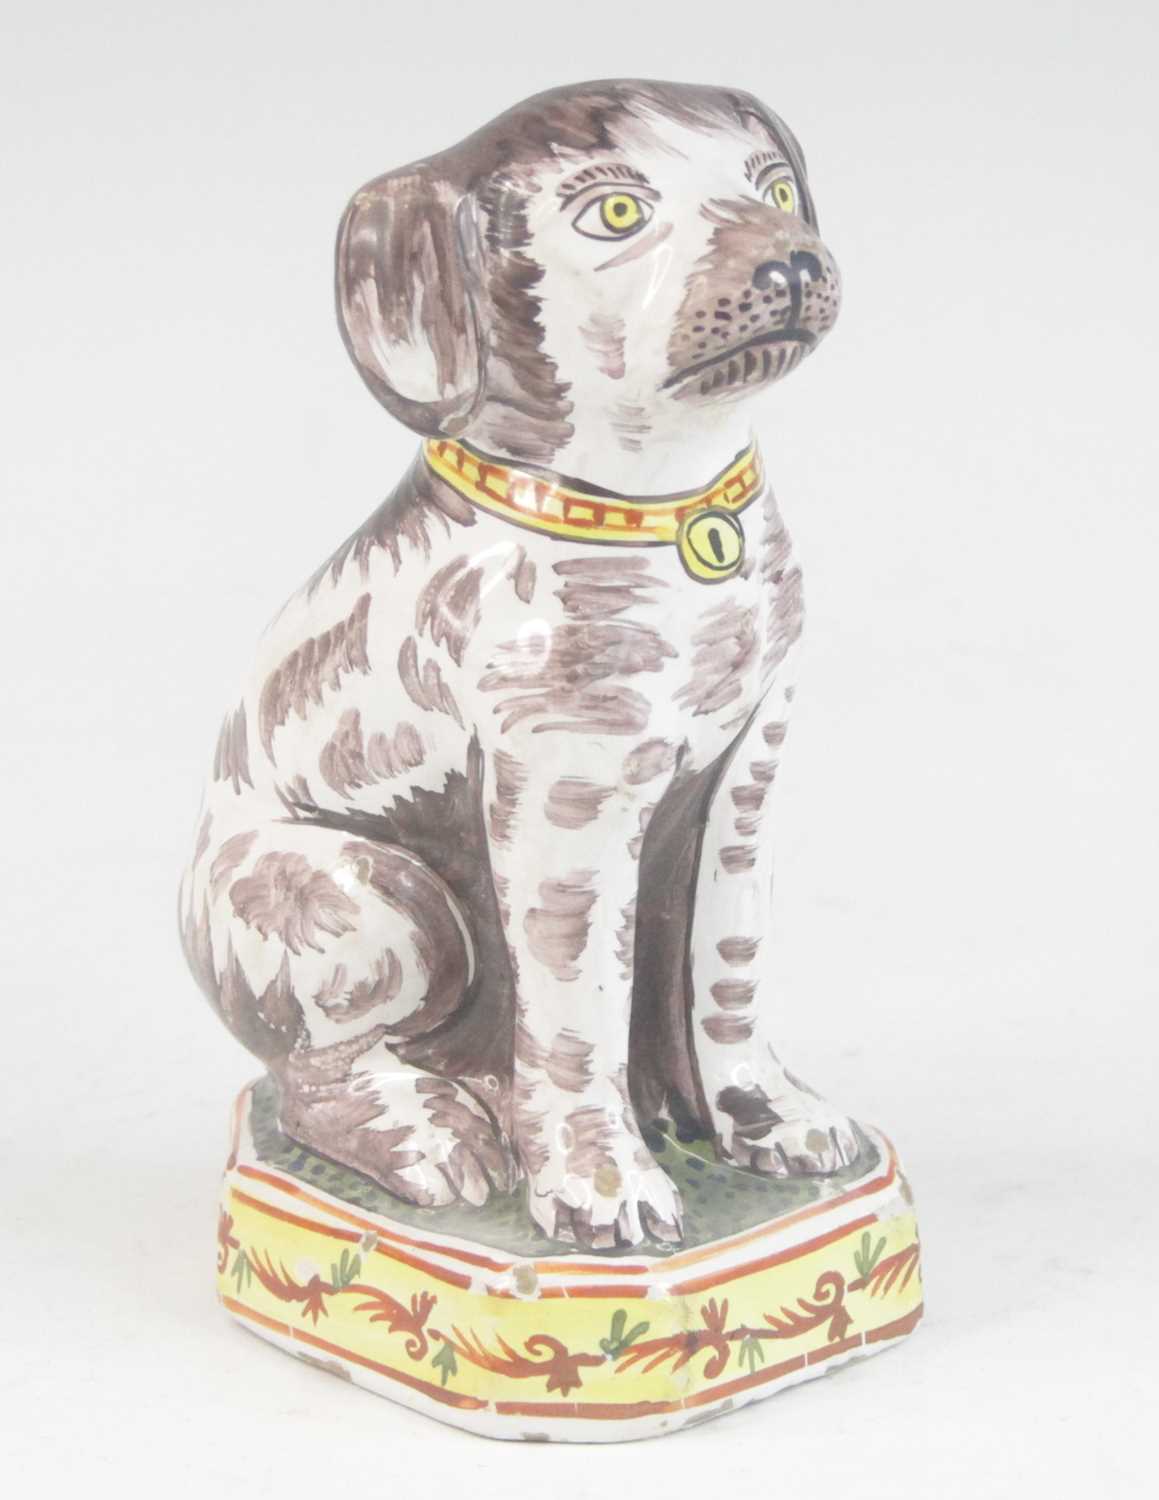 A Delft or Faience polychrome model of a dog, shown seated upon a canted plinth, PAK monogram to the